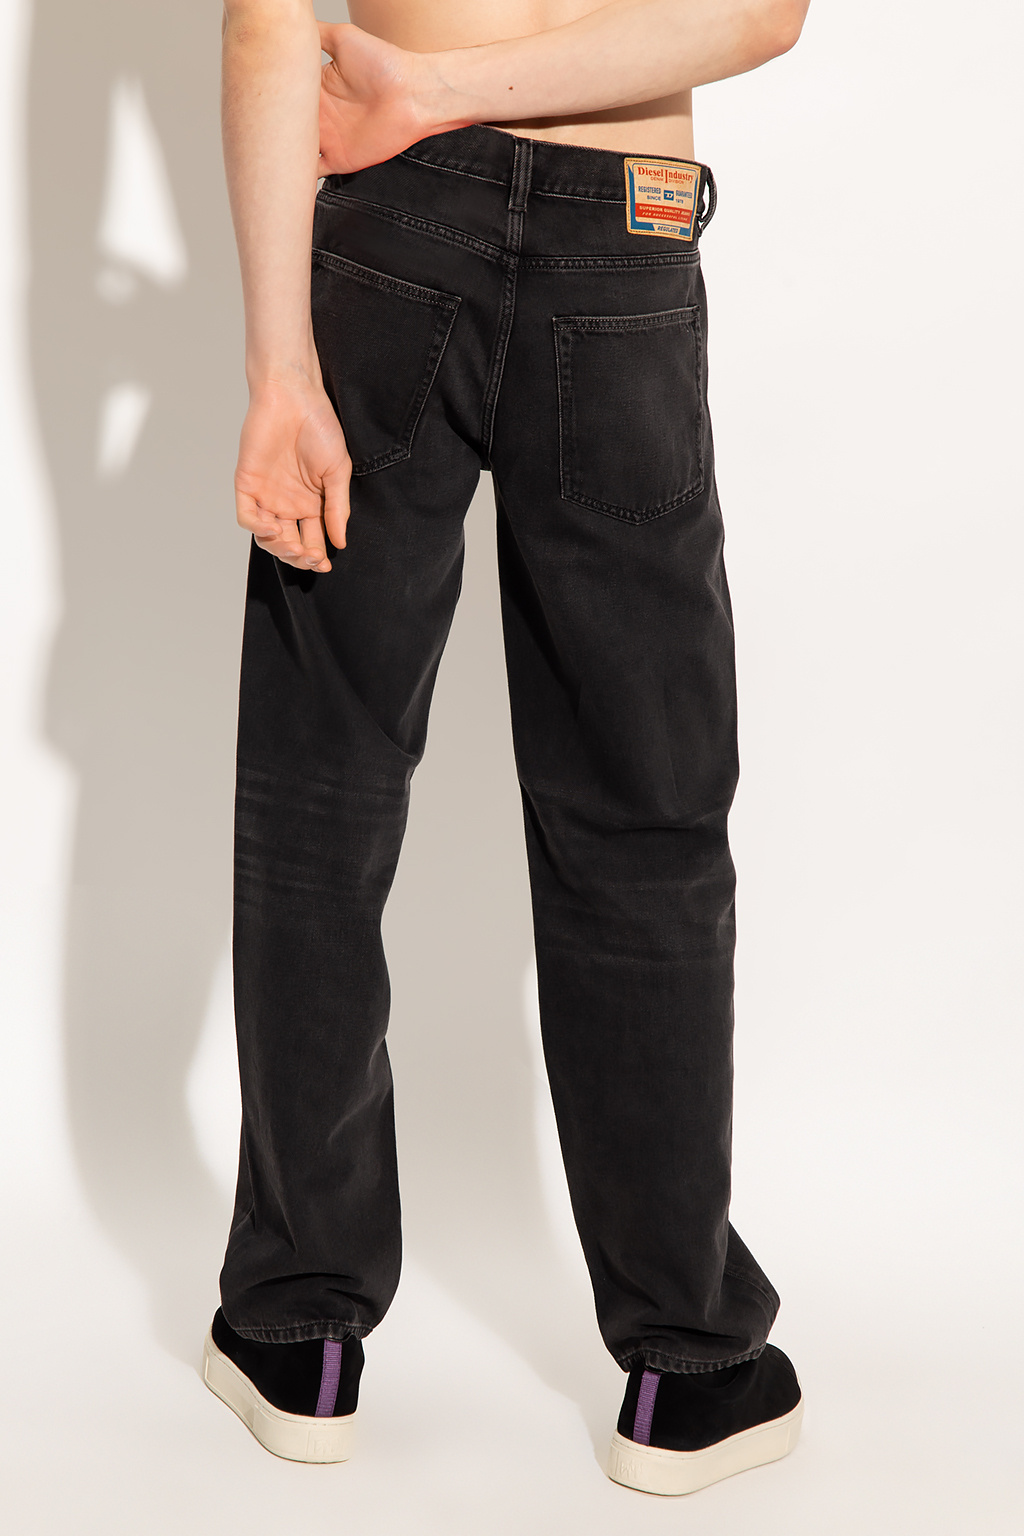 globaal Overwinnen Zegevieren Men's Clothing - Diesel '2010' loose | fit jeans - could be one of the  cutest colourways to dress this timeless silhouette yet | IetpShops